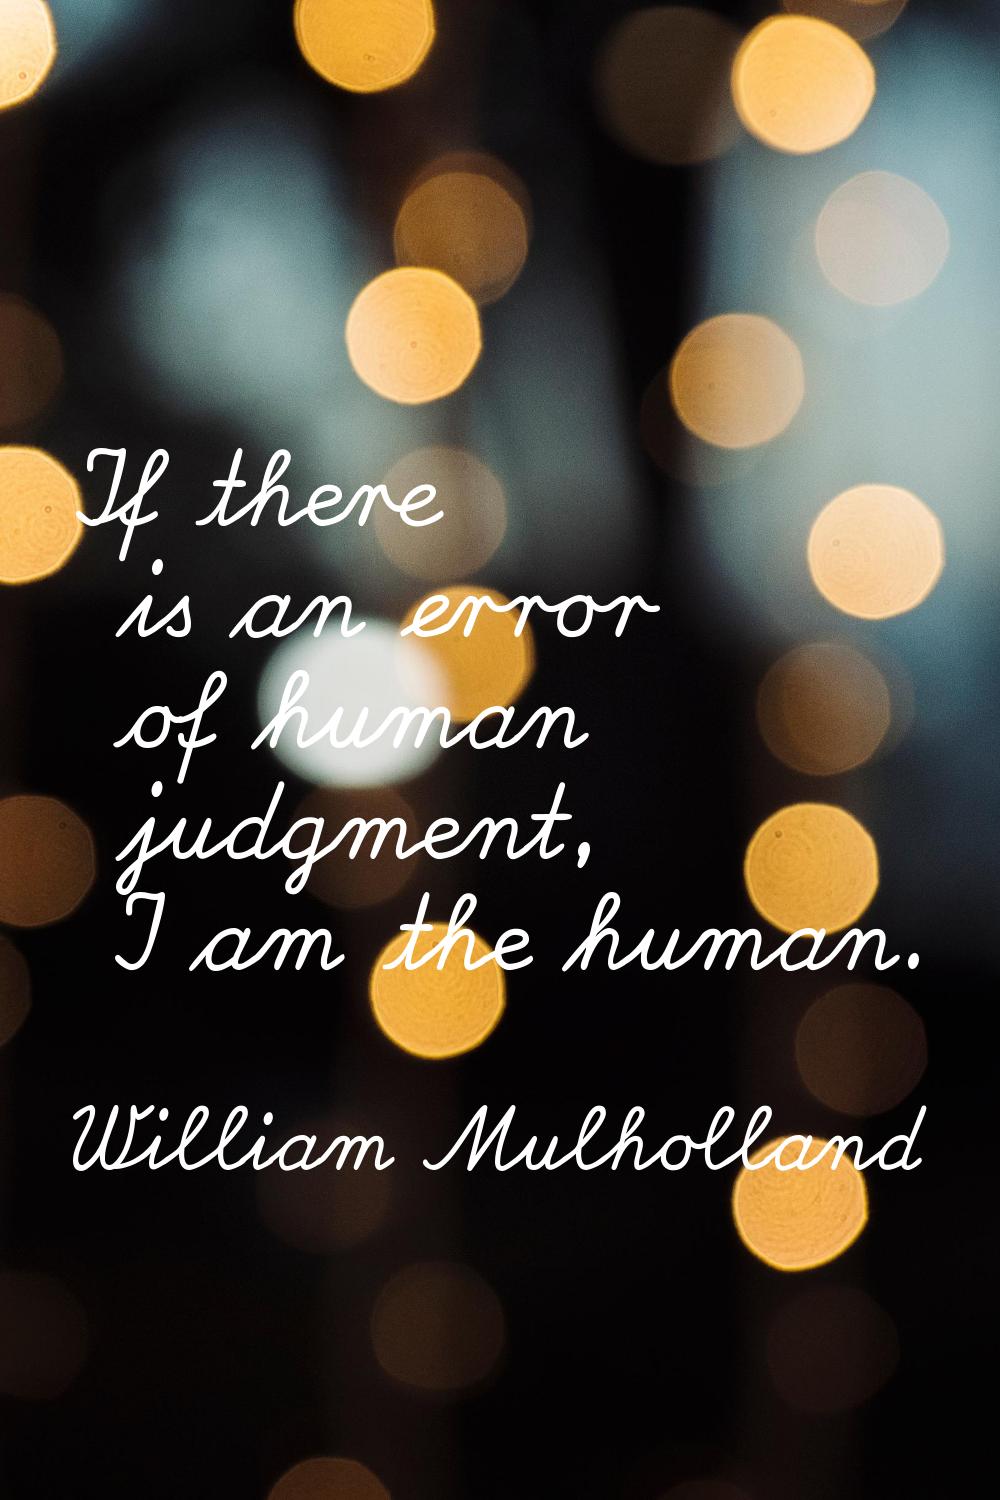 If there is an error of human judgment, I am the human.